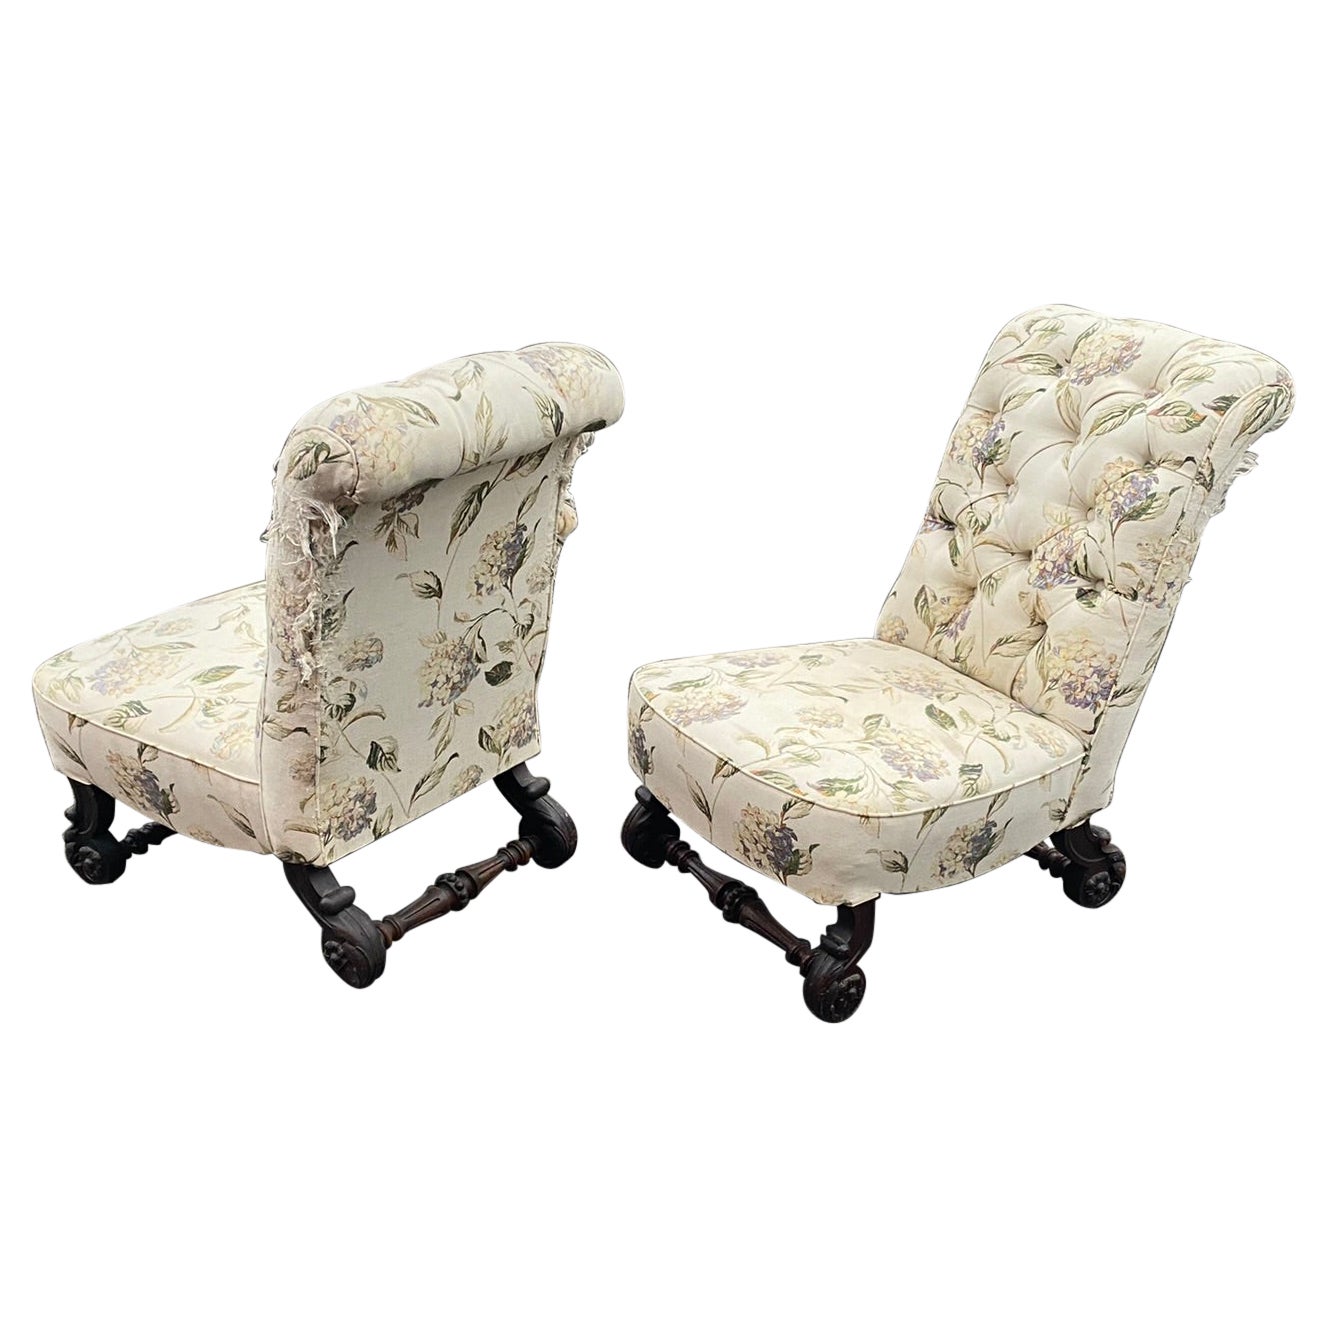 2 Original Napoleon III Low Chairs, France, 1850s For Sale